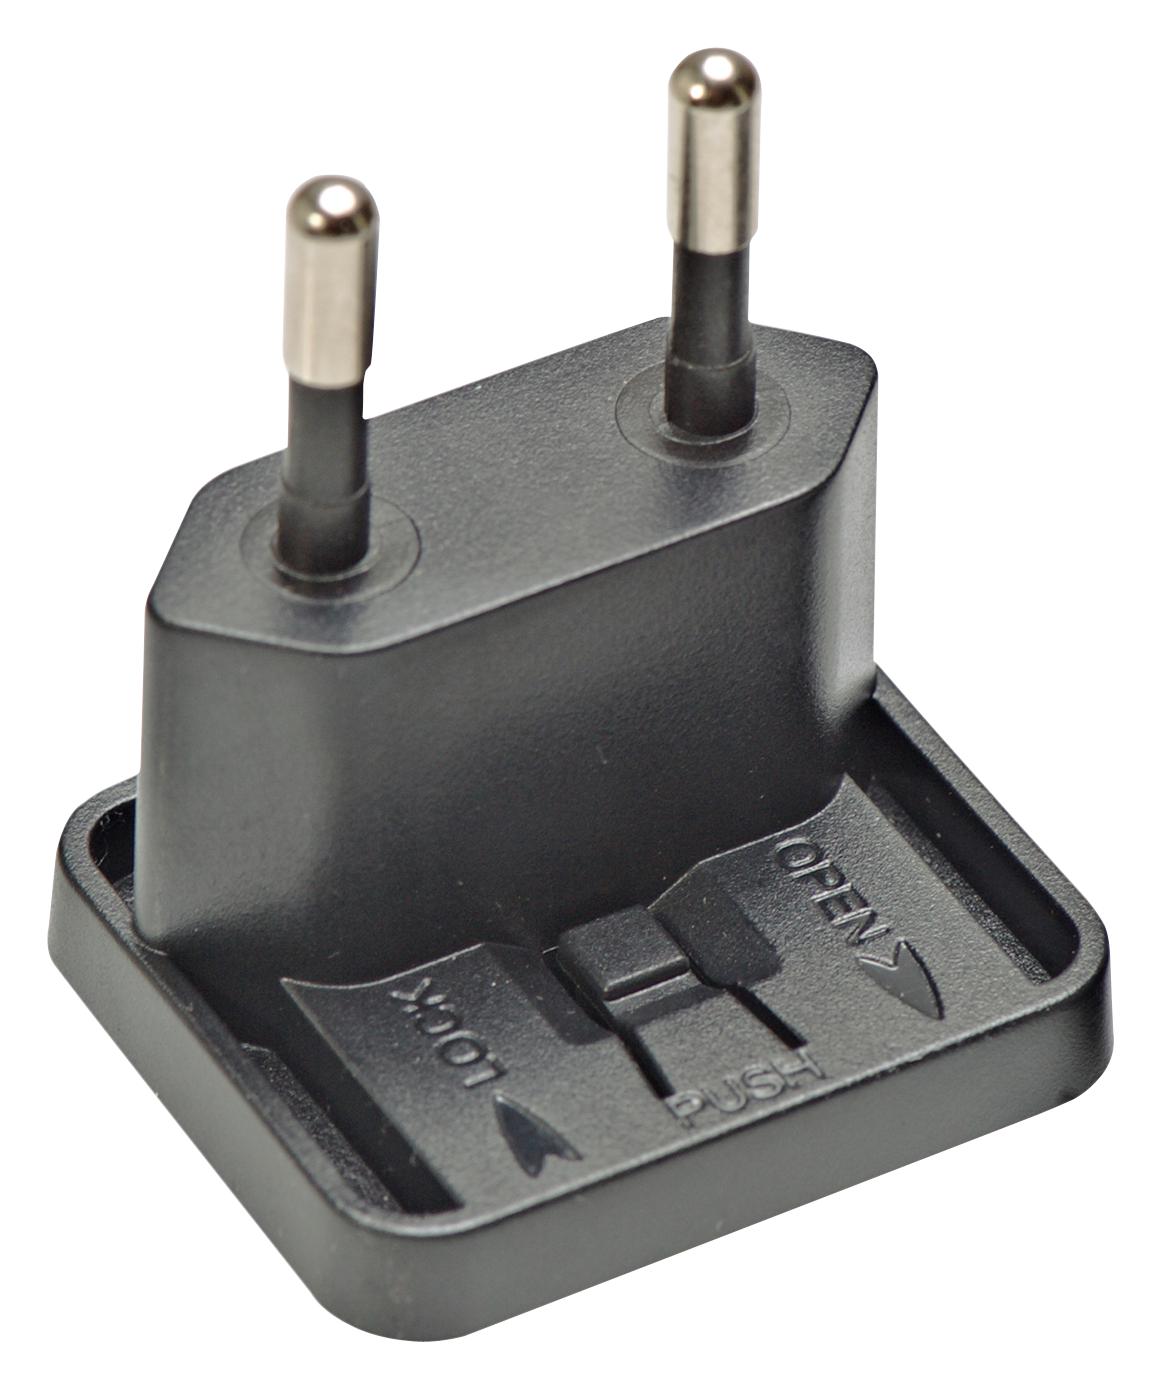 018126 EU EXCHANGEABLE AC PLUG ADAPTER, SMPS MASCOT